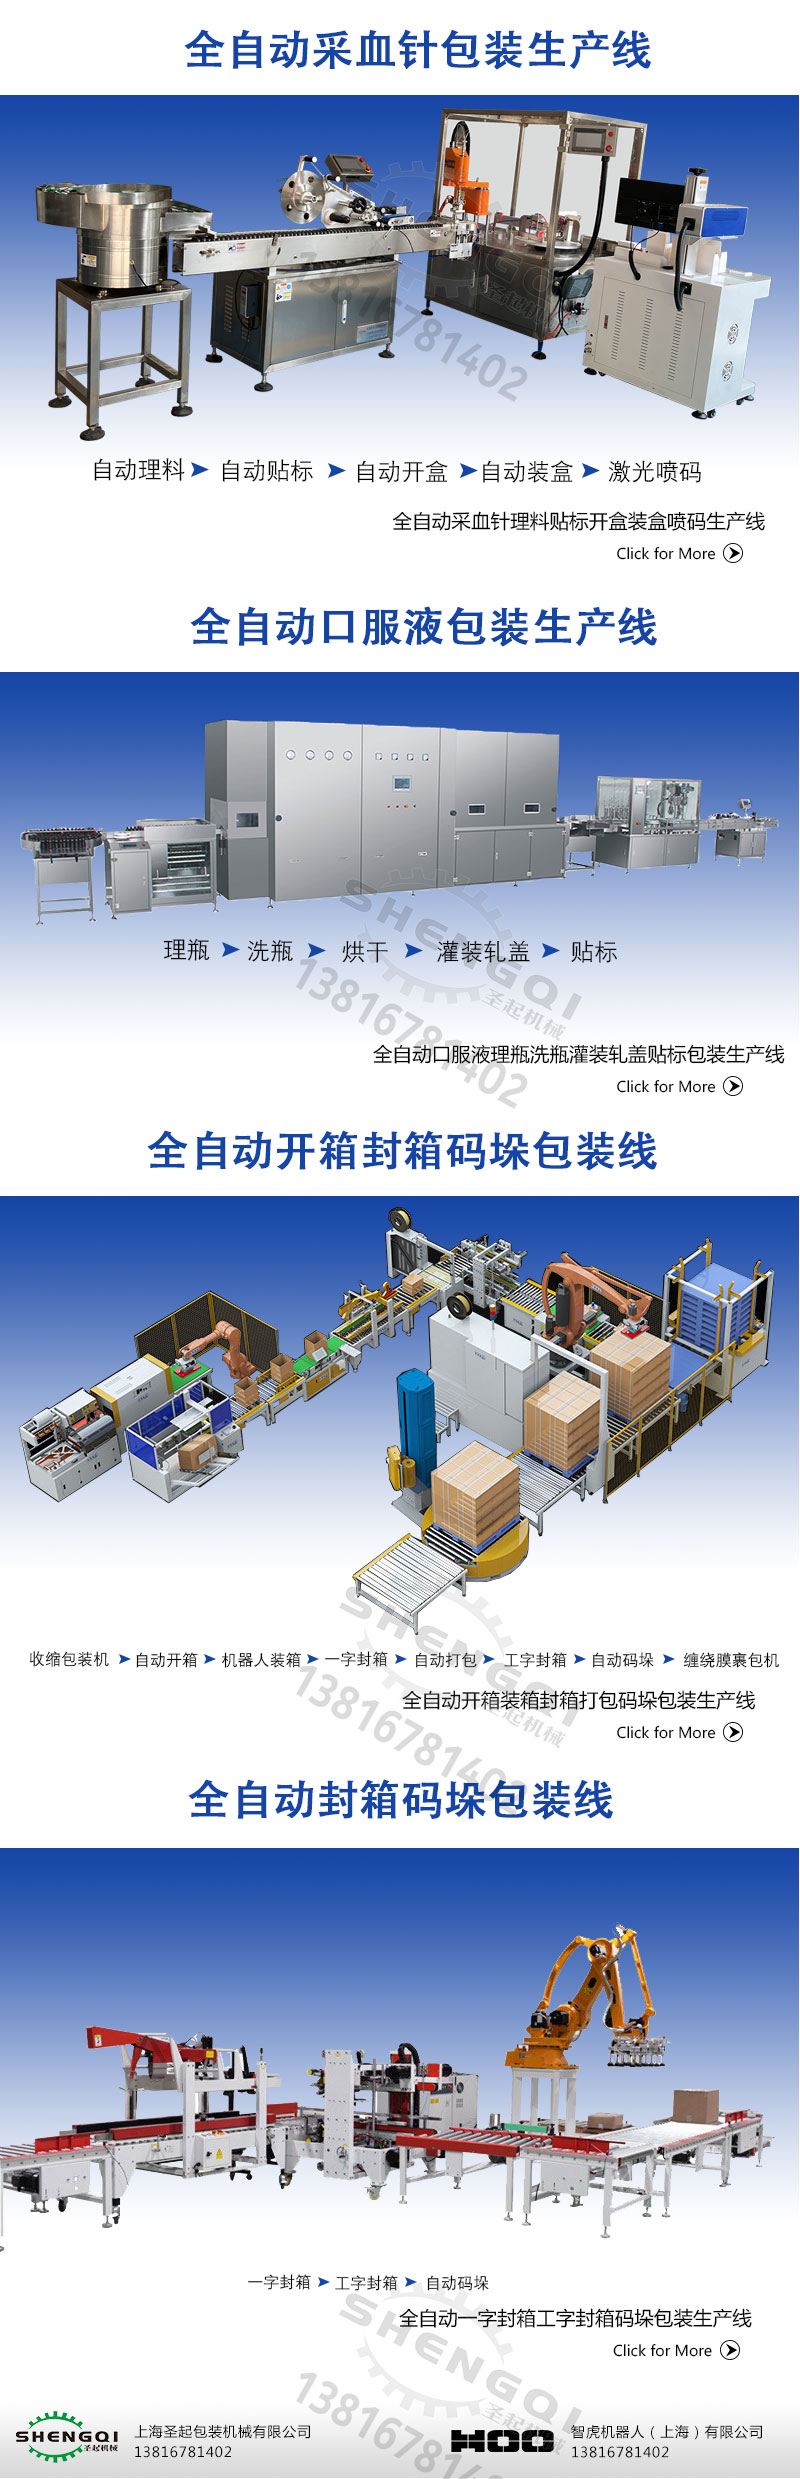 Automatic box filling equipment for toothpaste and ointment, bottling and labeling machine manufacturer, high-speed medicine plate box filling machine